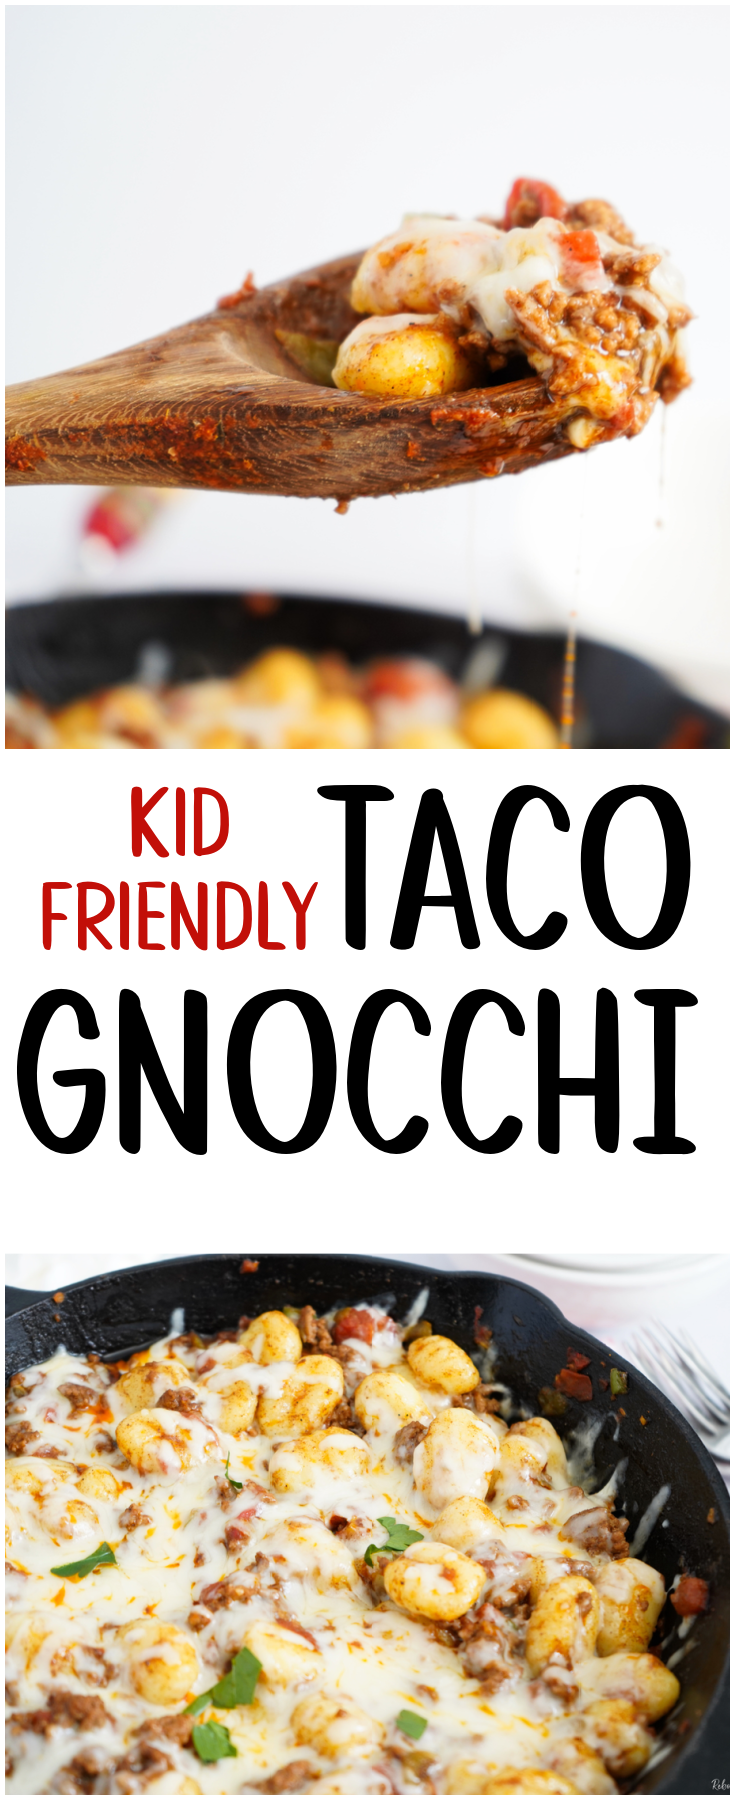 Taco Gnocchi takes regular gnocchi and elevates it up a level to an easy, delicious, kid-friendly dinner ready in 20 minutes with just 5 ingredients!